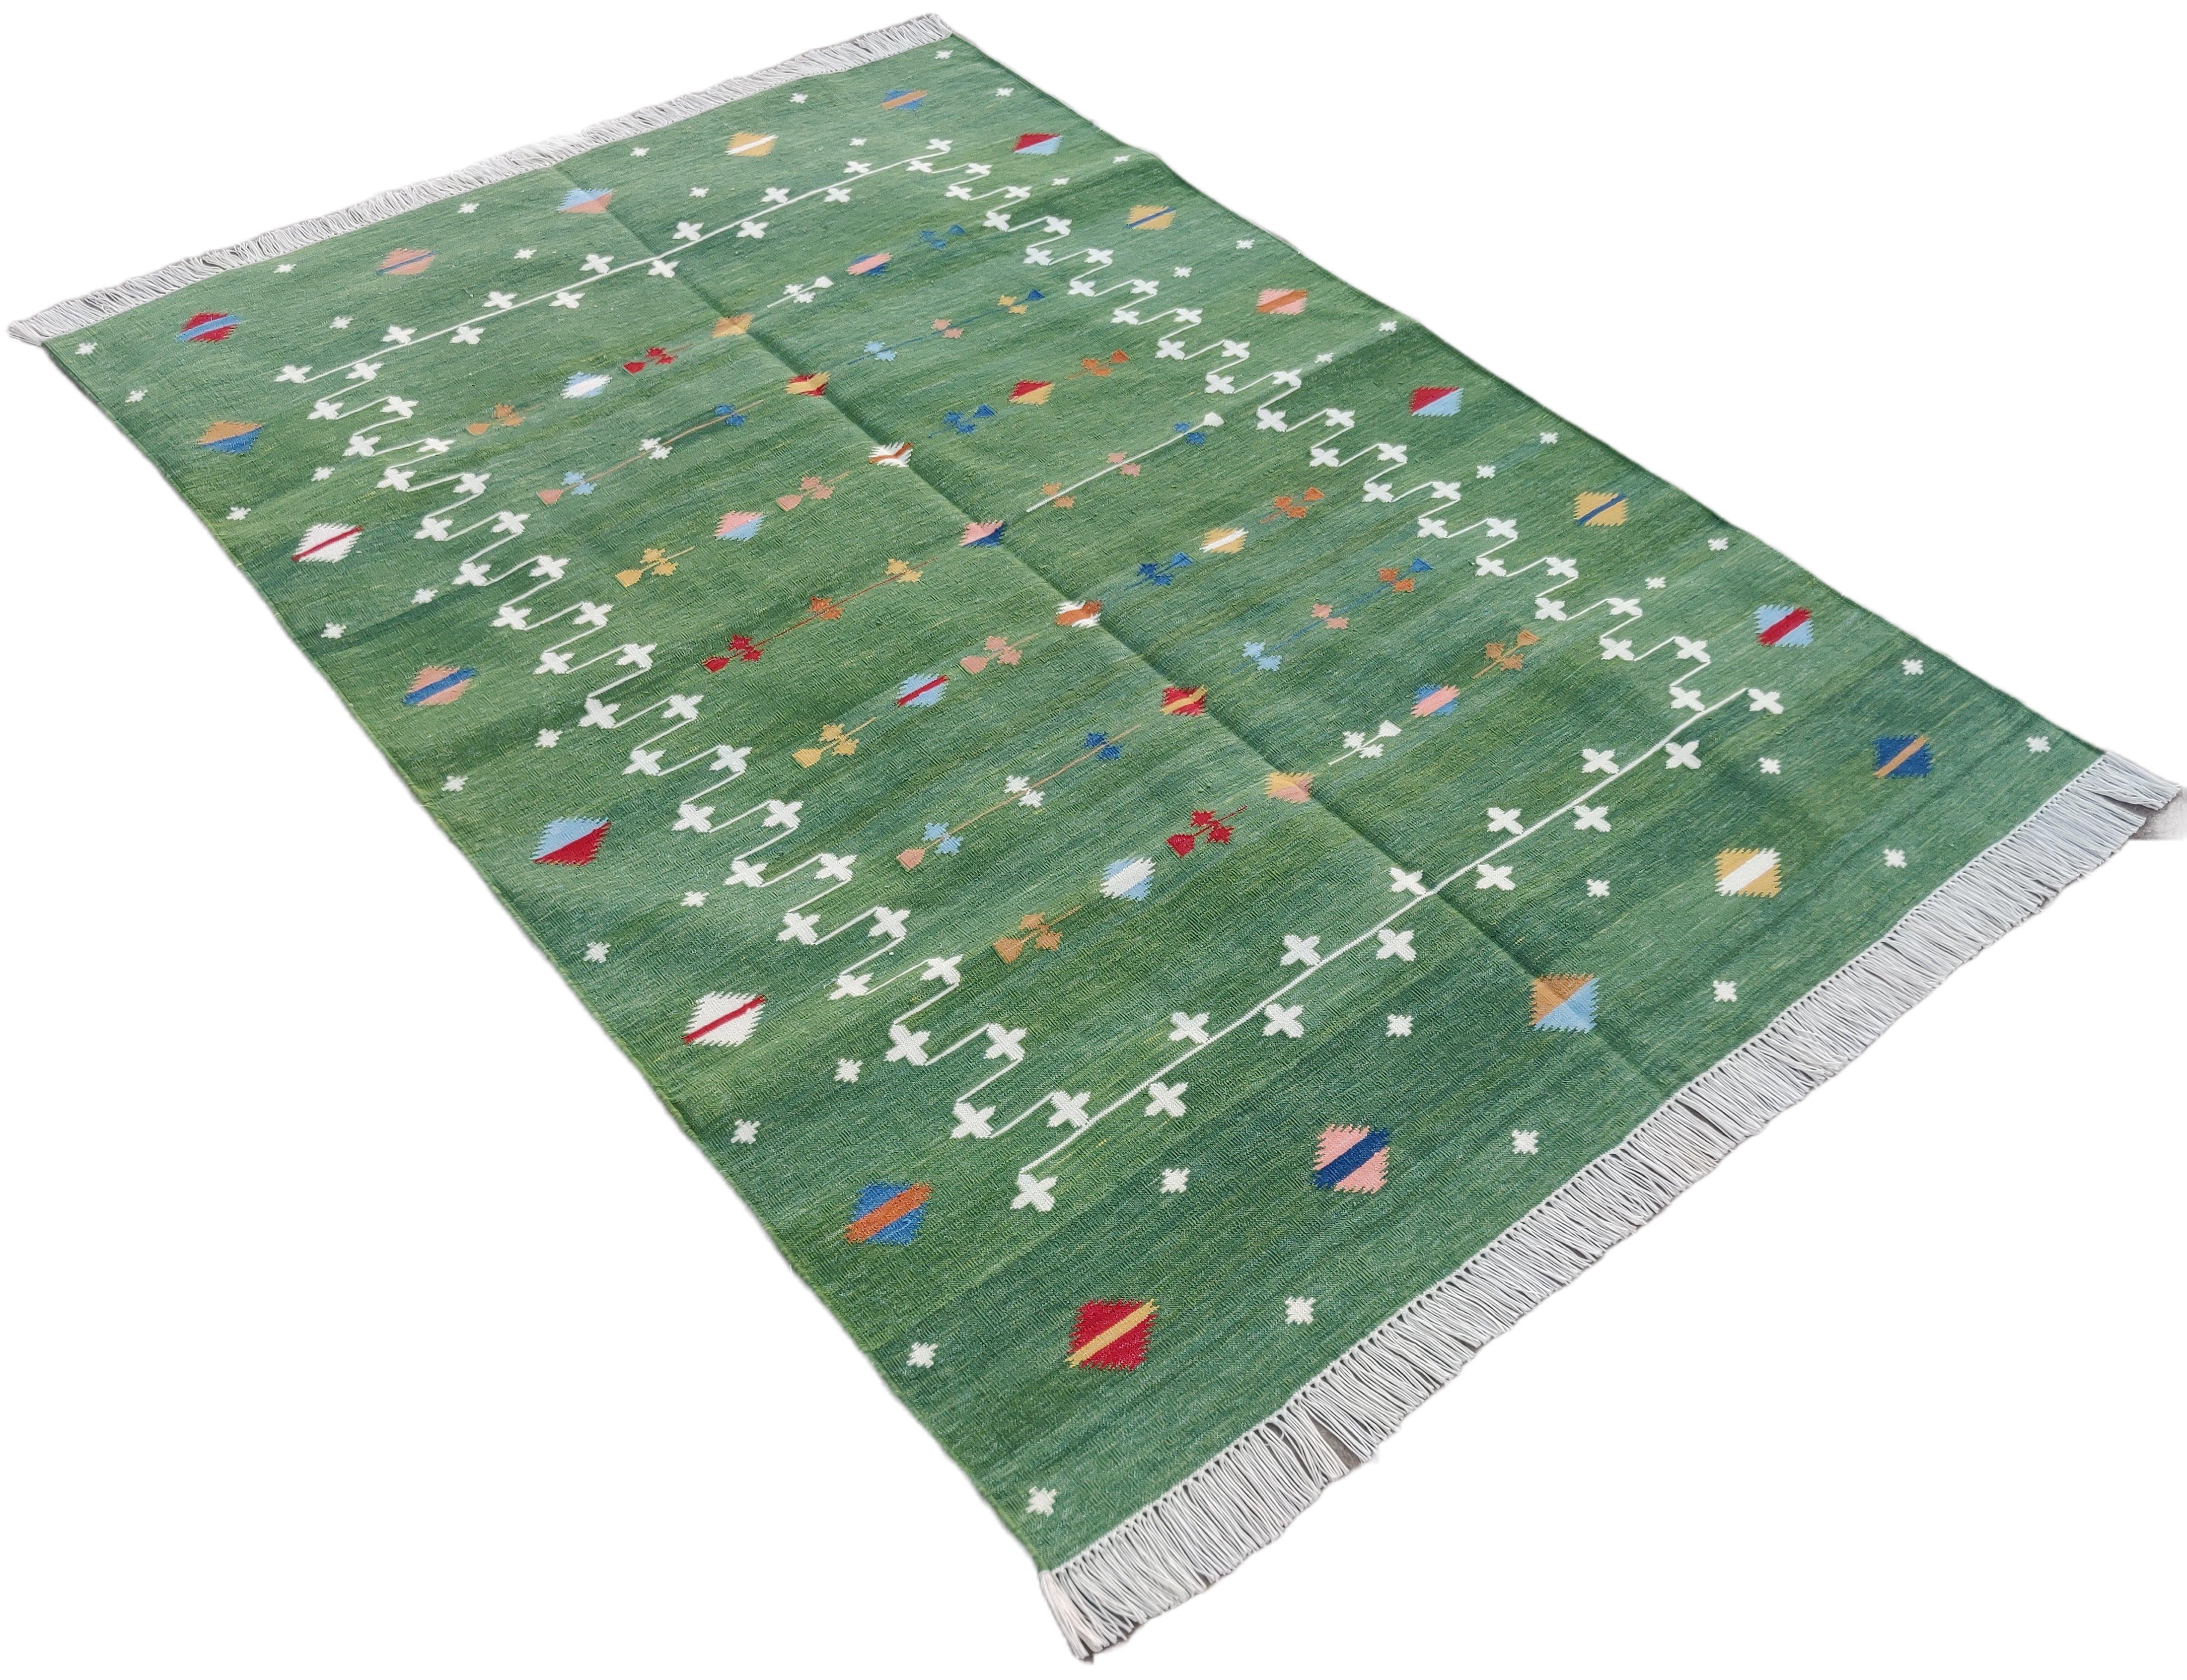 Cotton Vegetable Dyed Forest Green Shooting Star Rug-4'x6'
These special flat-weave dhurries are hand-woven with 15 ply 100% cotton yarn. Due to the special manufacturing techniques used to create our rugs, the size and color of each piece may vary